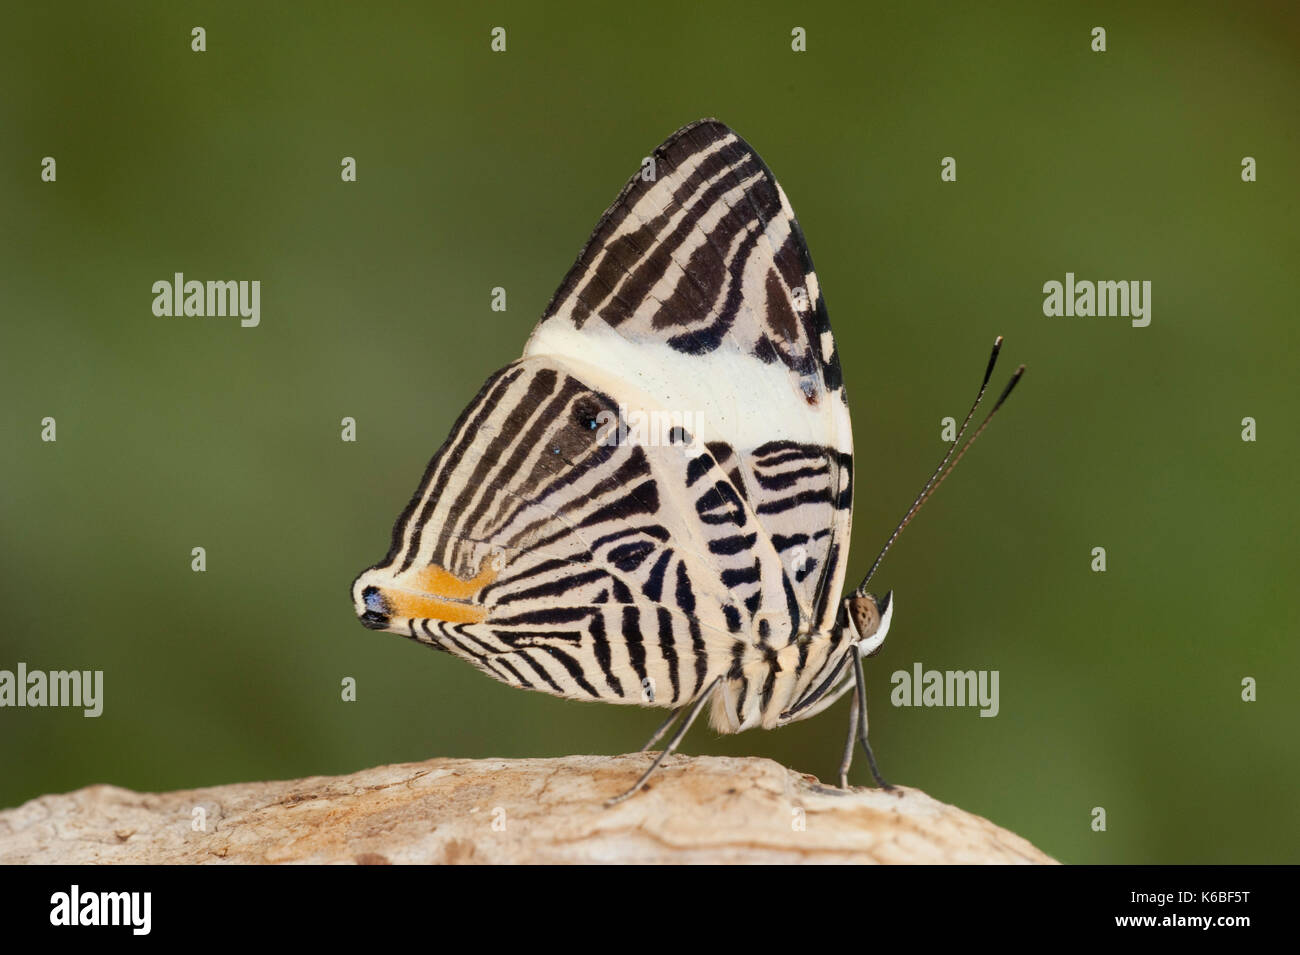 Dirce Beauty, Butterfly, Colobura dirce,  Nymphalidae, Central America and northern South America, Mosaic or Zebra Mosaic, rainforest, patterned under Stock Photo